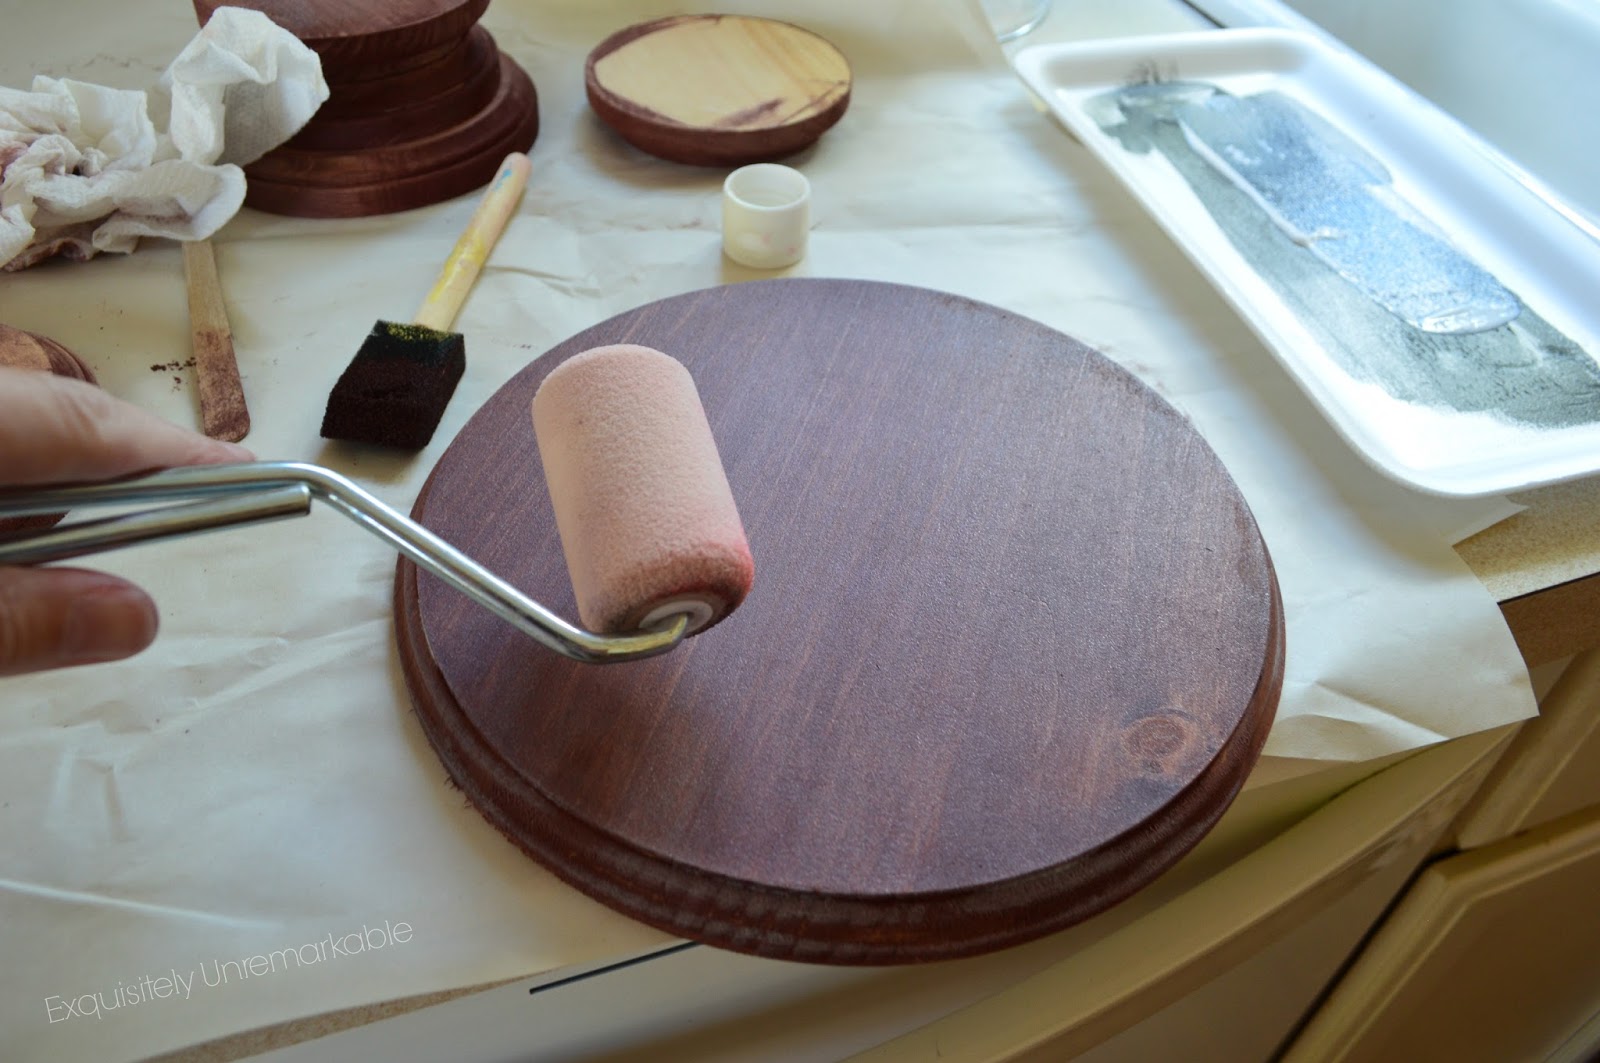 DIY Wooden Cake Stand |Exquisitely Unremarkable